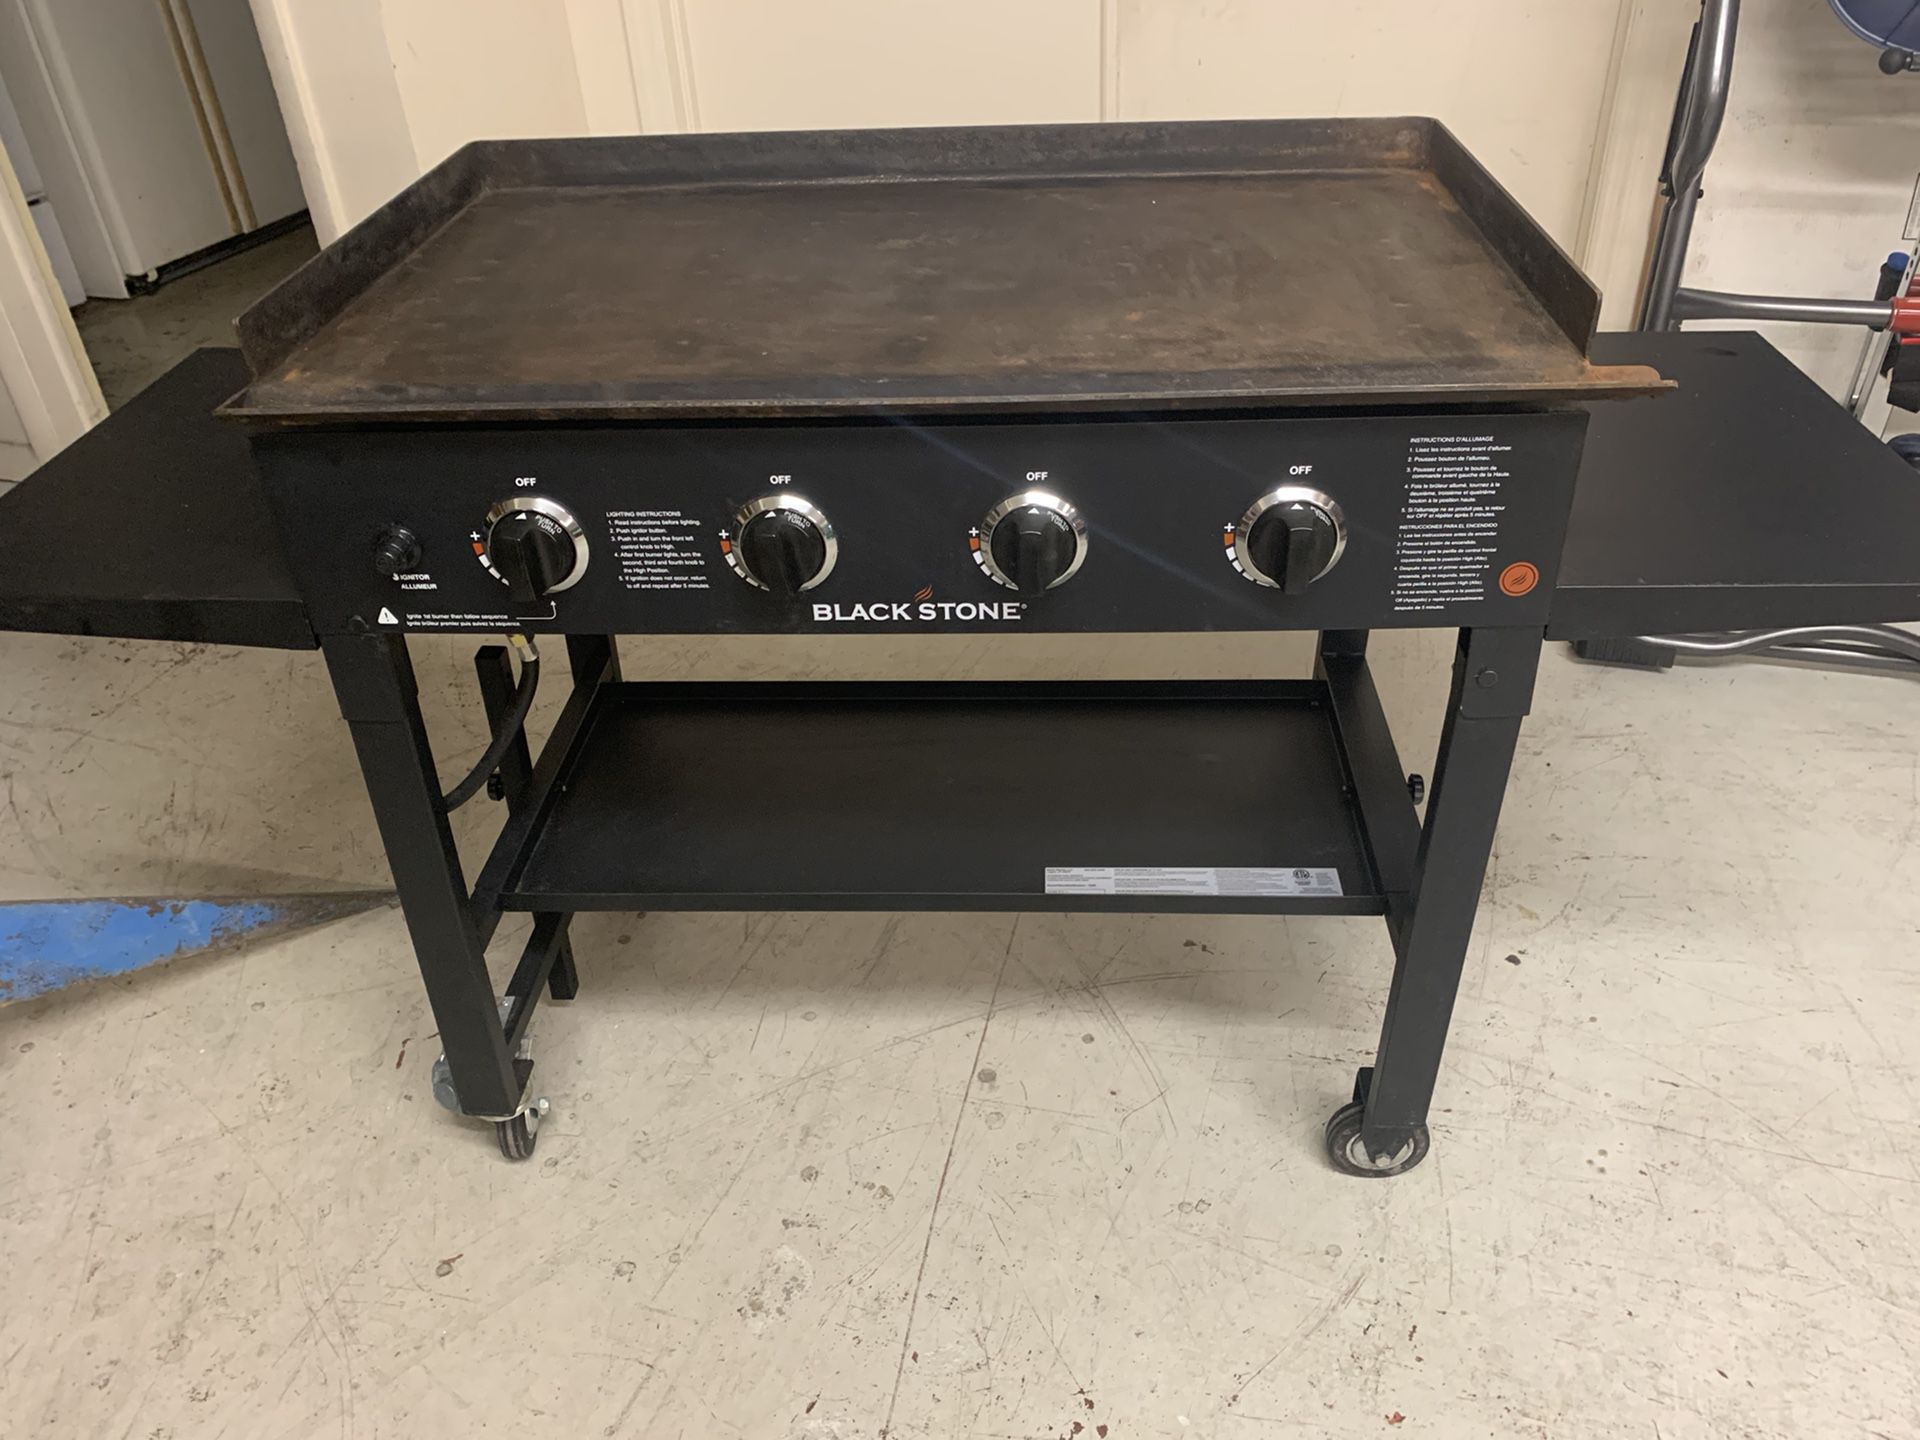 Blackstone 36 in propane Gas Griddle cooking station